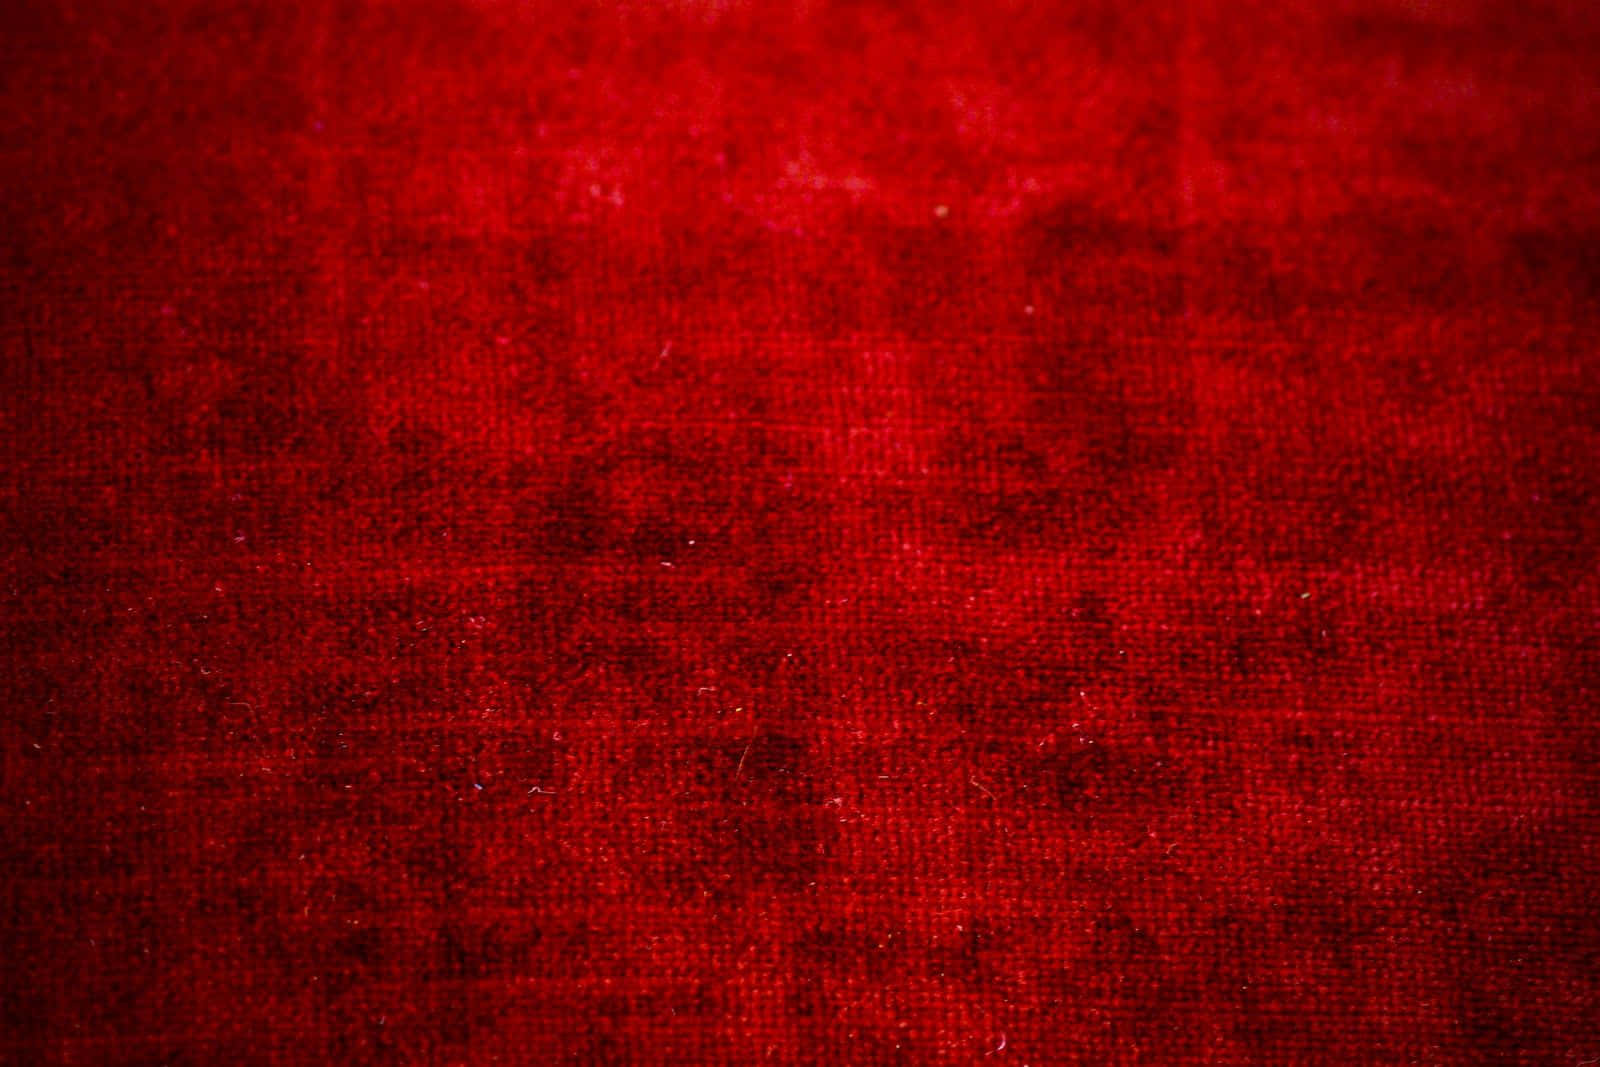 A Red Cloth With A Lot Of Dirt